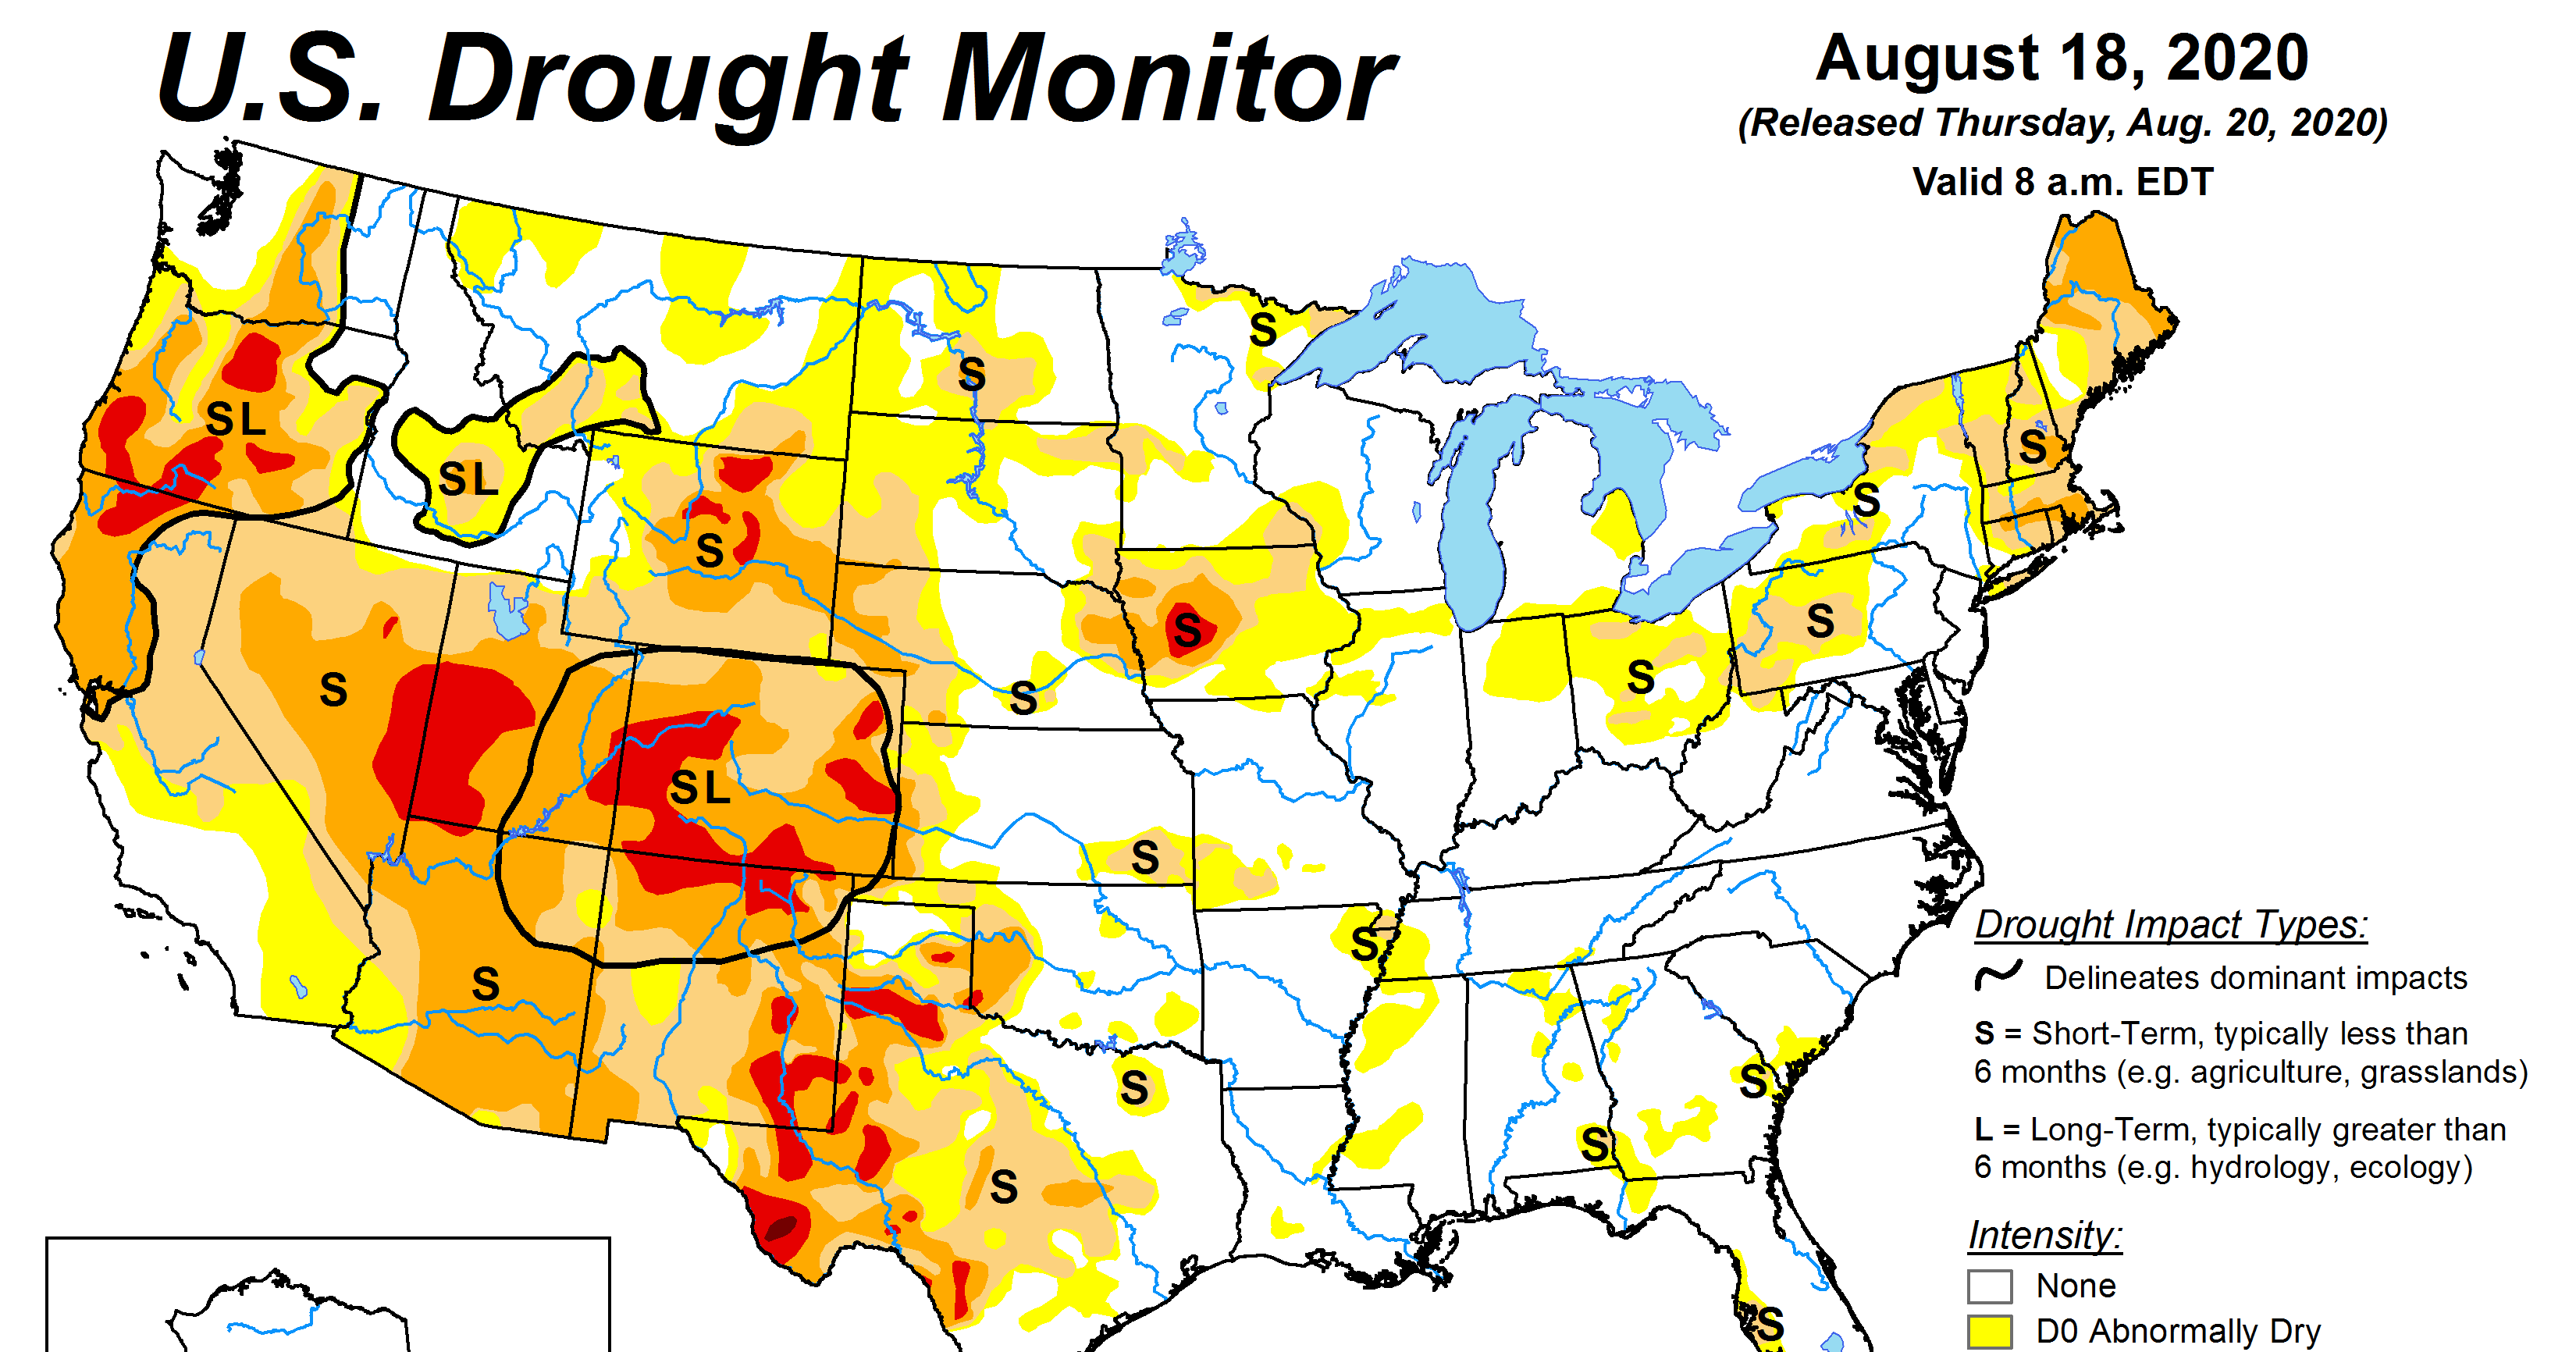 How much of the U.S. is in drought?